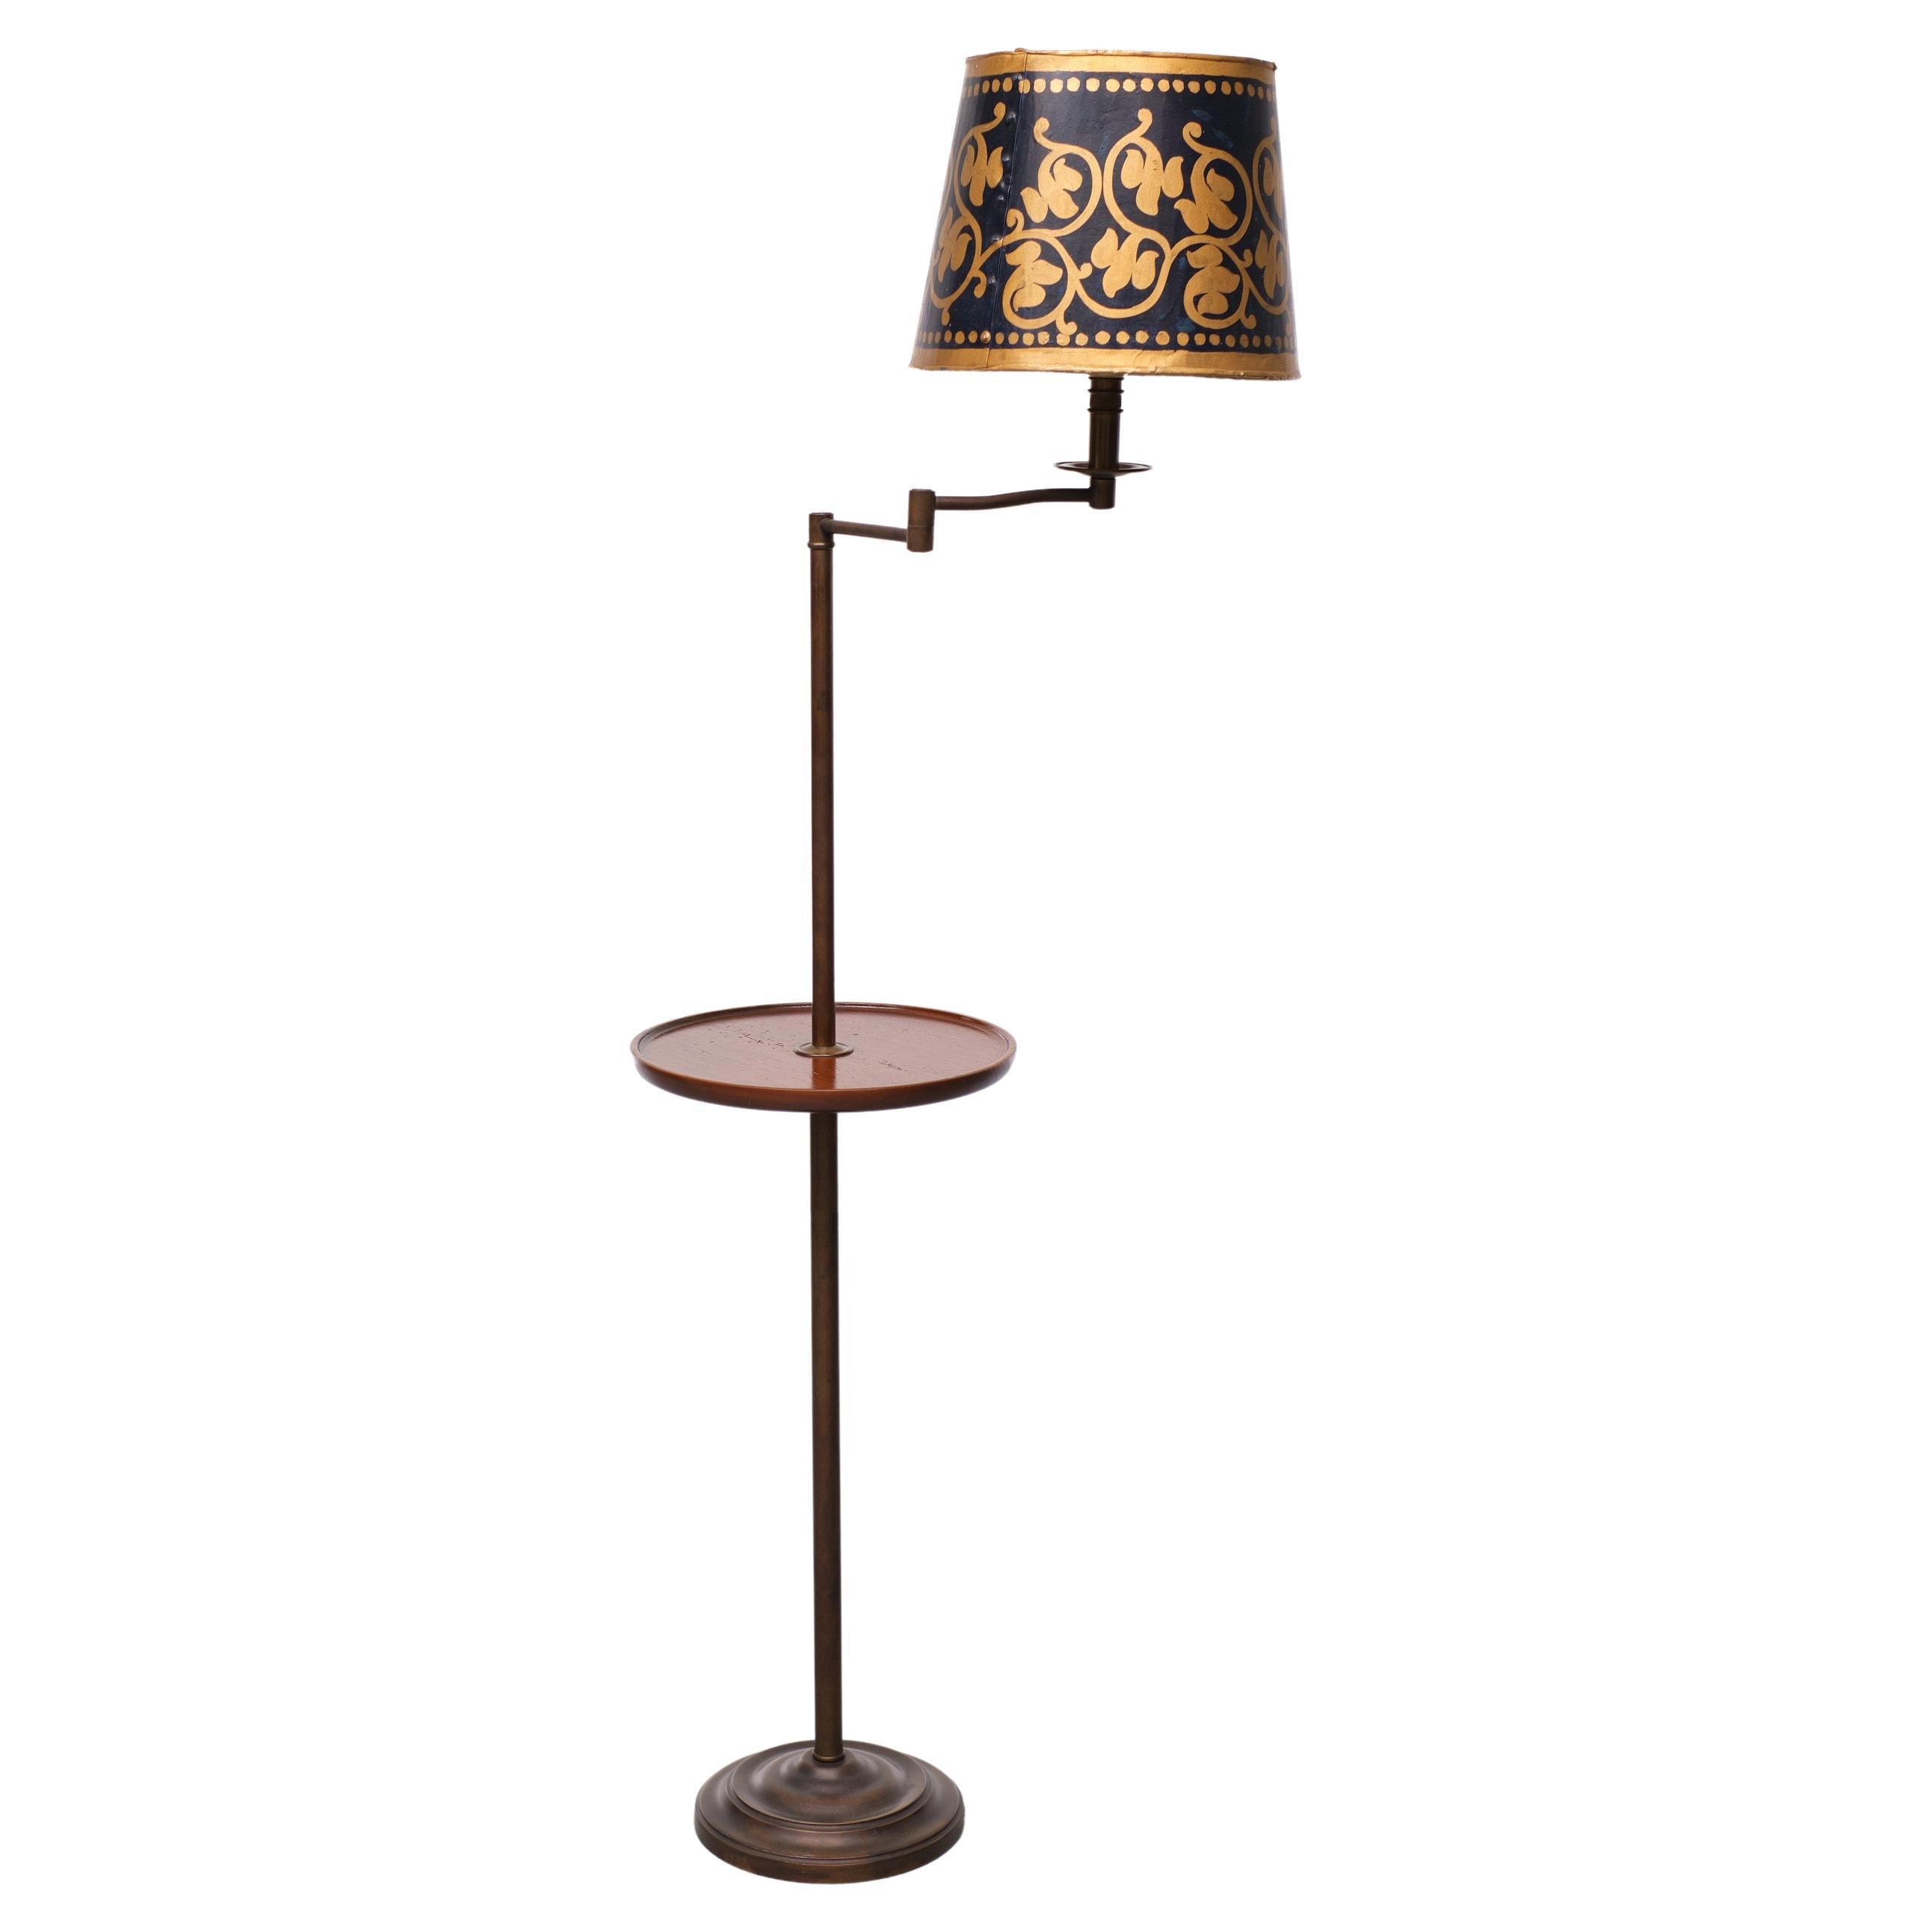 Victorian Swing Arm Floor Lamp with Table, England